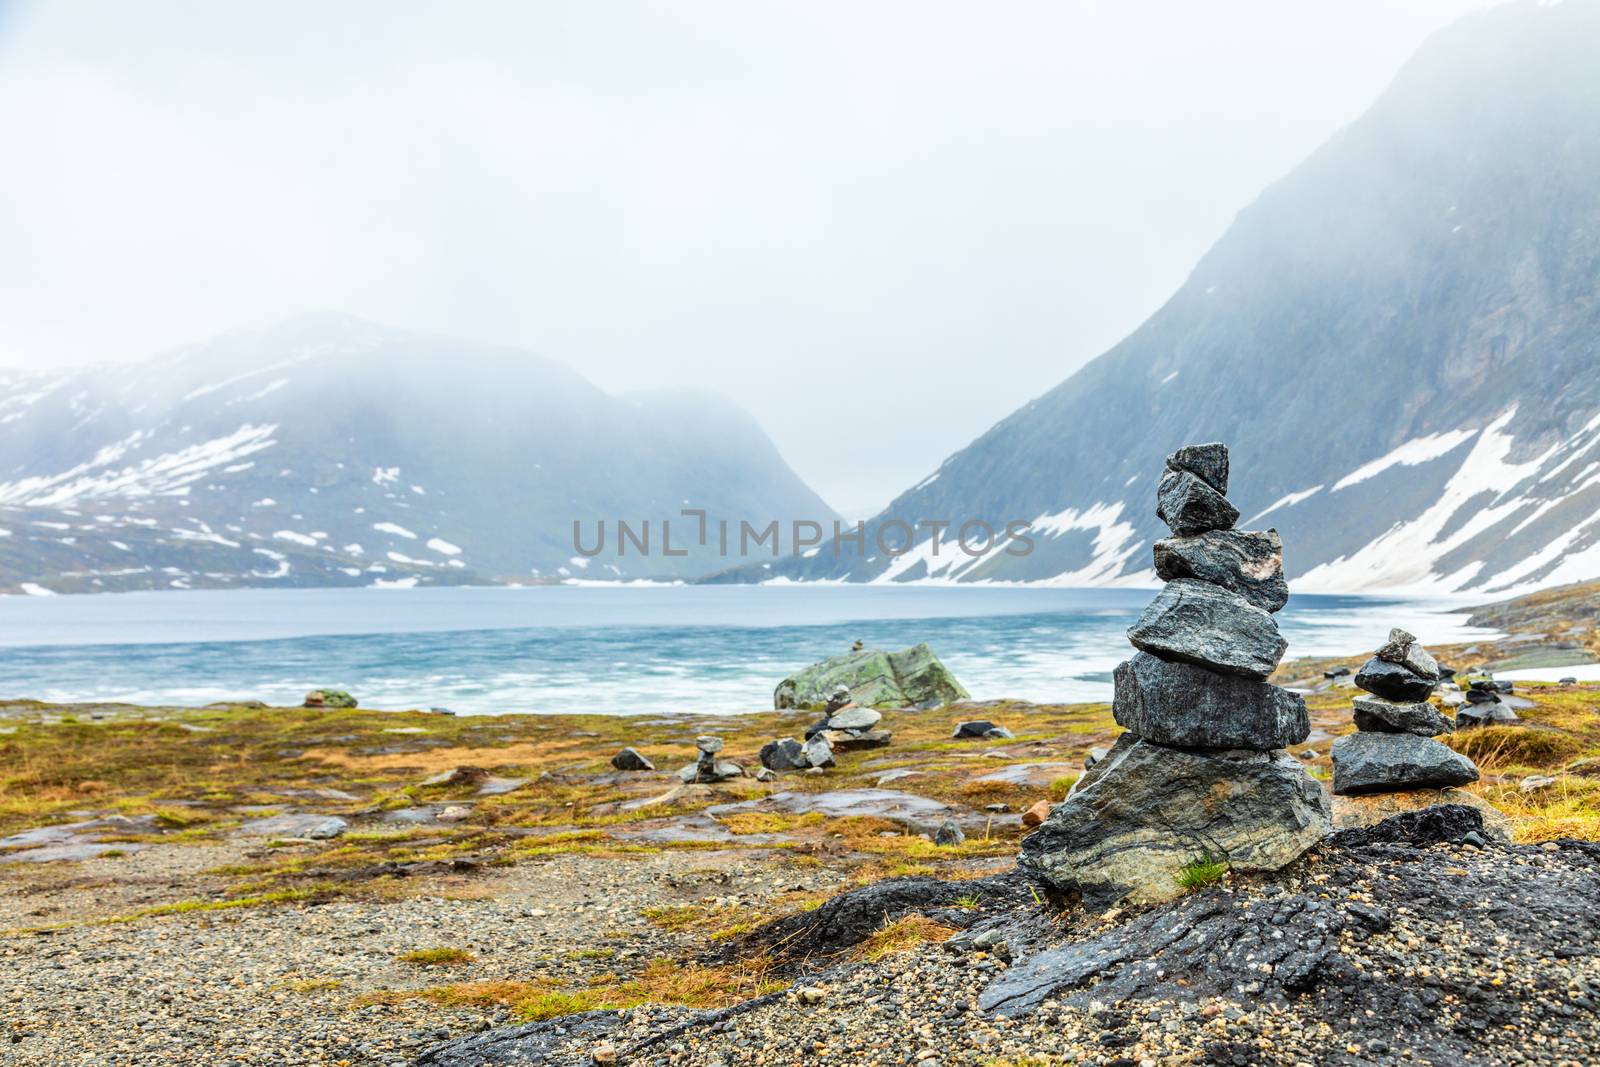 Stone cairns at the Djupvatnet lake Geiranger, Sunnmore region, More og Romsdal county, Norway